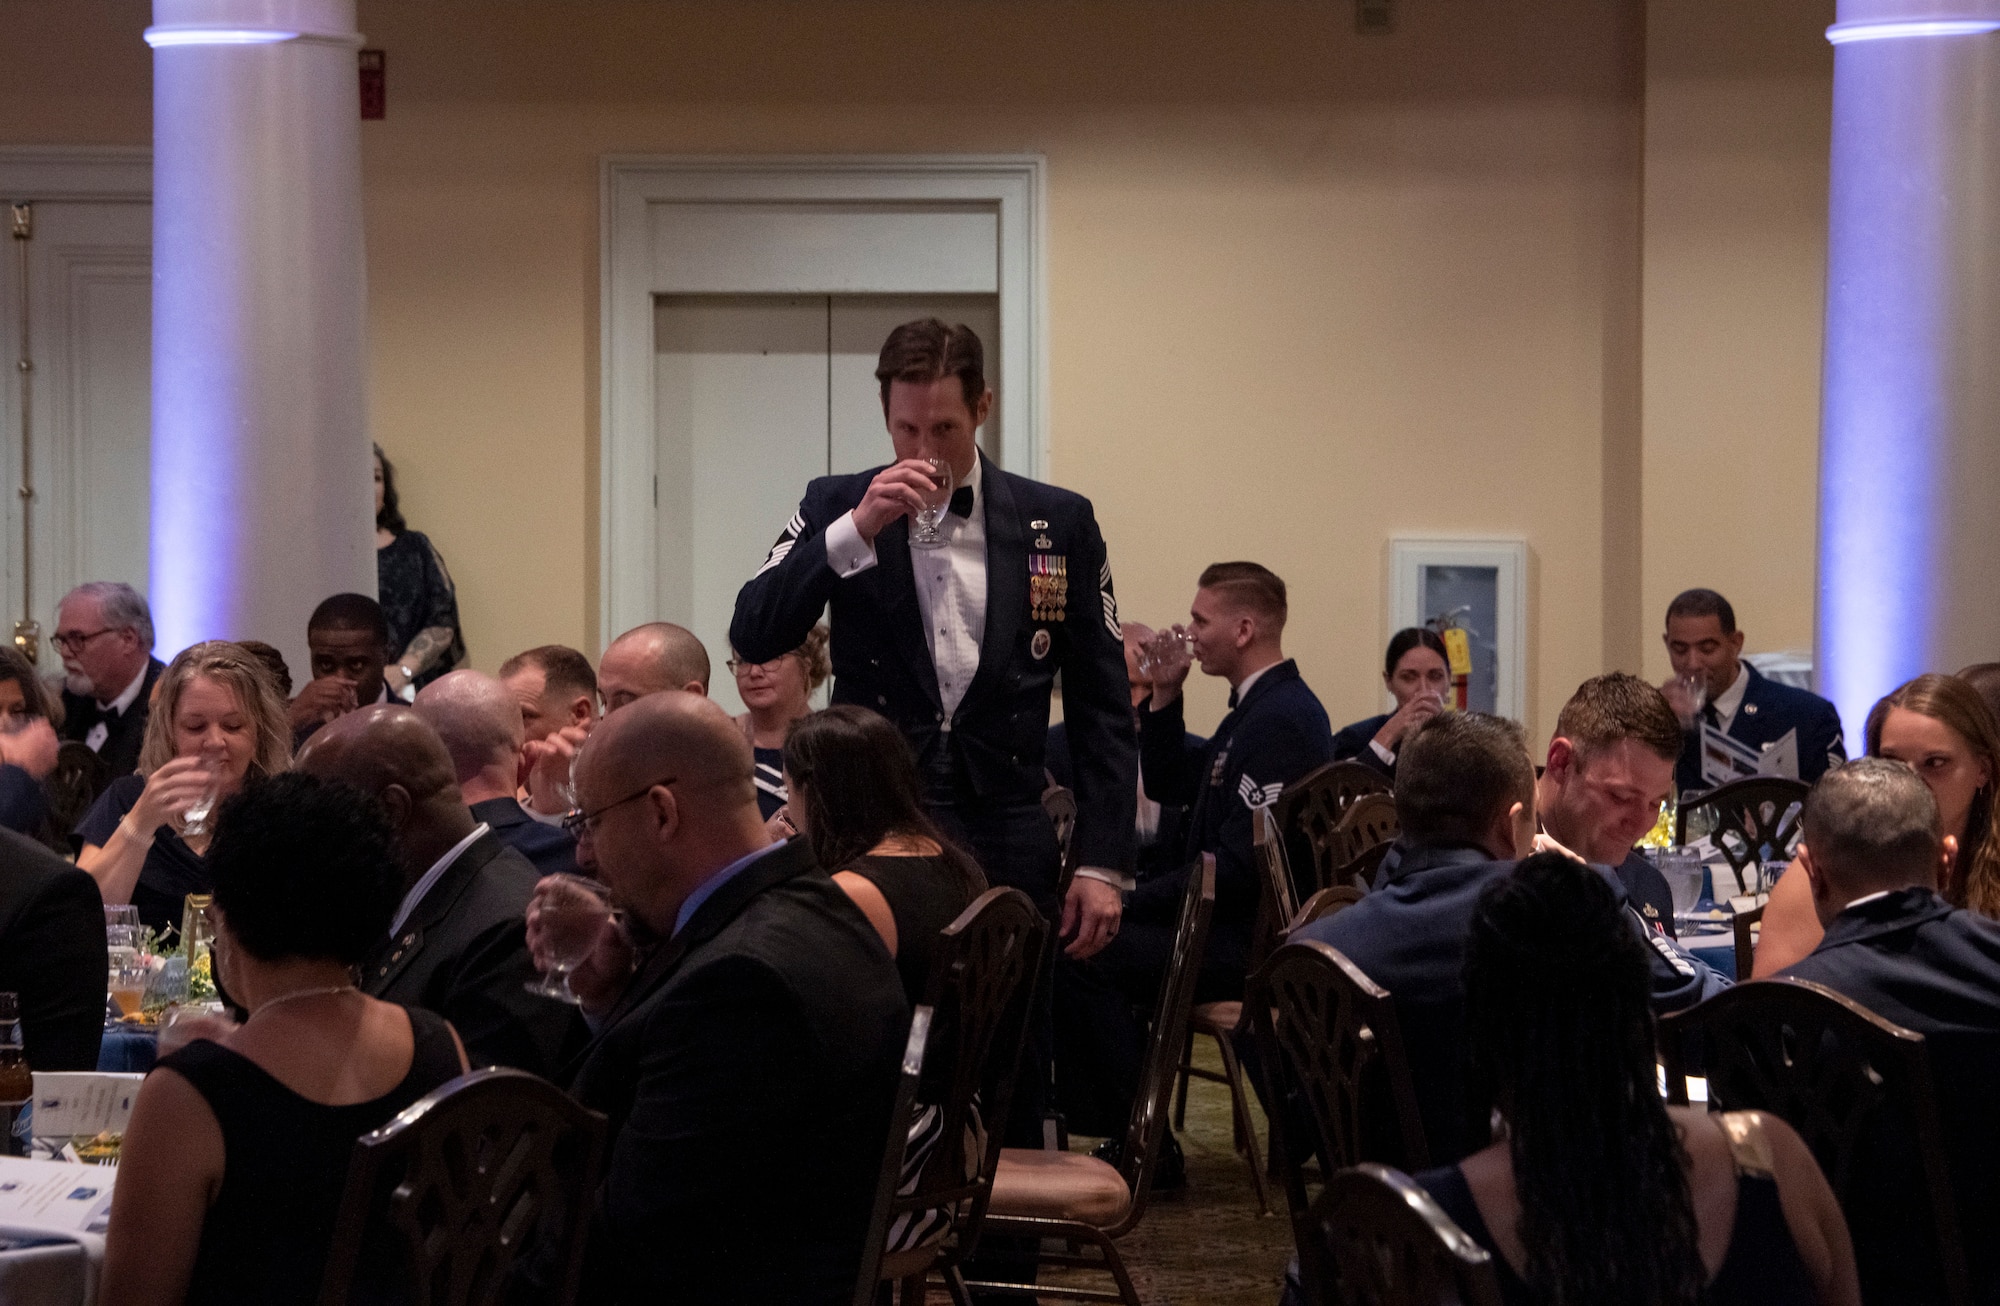 Chief Master Sgt. Alex Eudy, commandant of the Senior Noncommissioned Officer Academy, leads the room in a toast to the 50th Anniversary of the SNCOA during the anniversary gala at the Montgomery Country Club, Montgomery, Ala., Nov. 9, 2023. (U.S. Air Force photo/Tech. Sgt. John Clark)